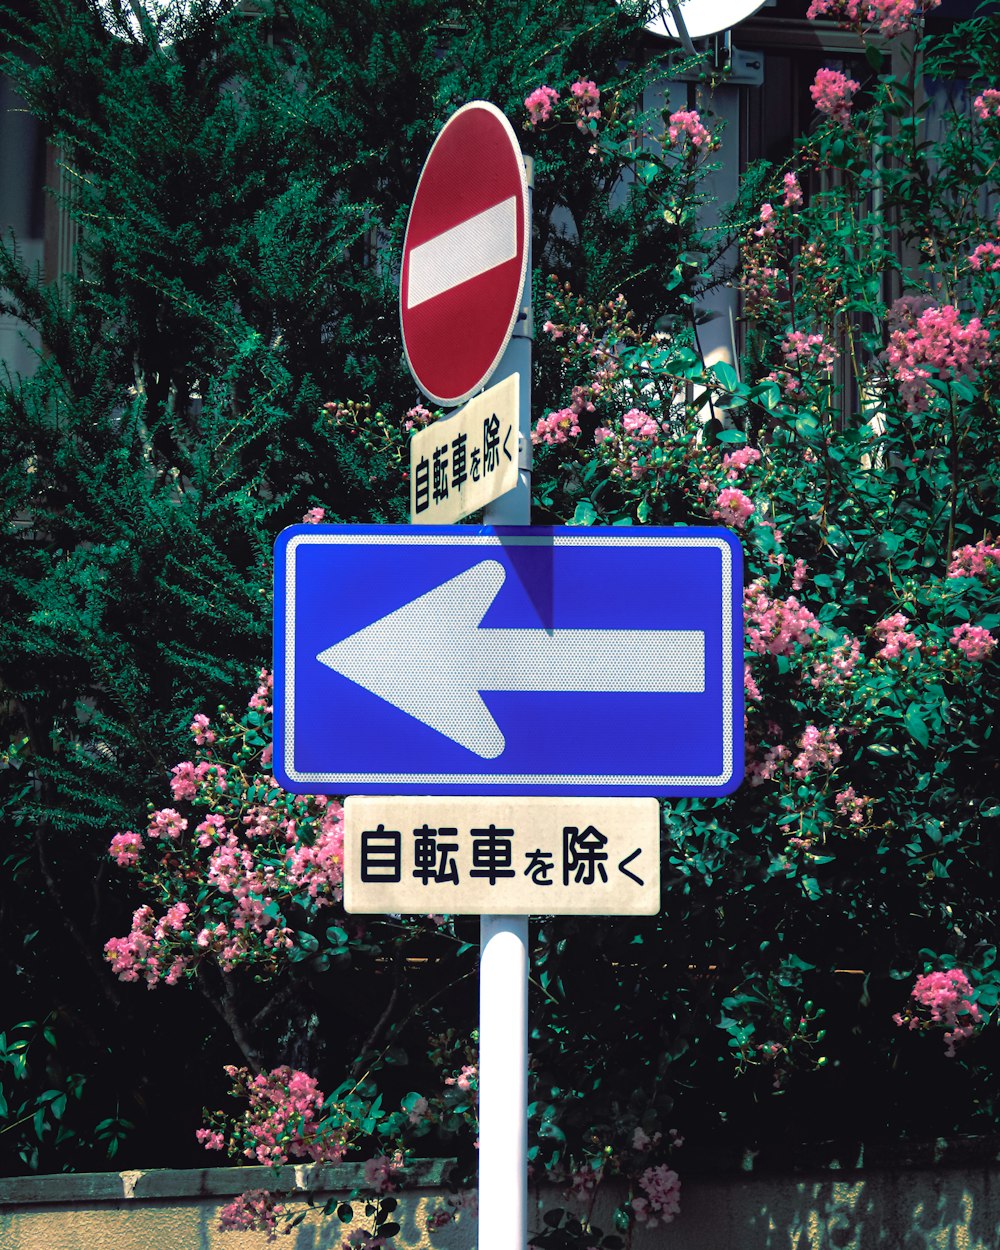 a street sign with an arrow pointing to the left